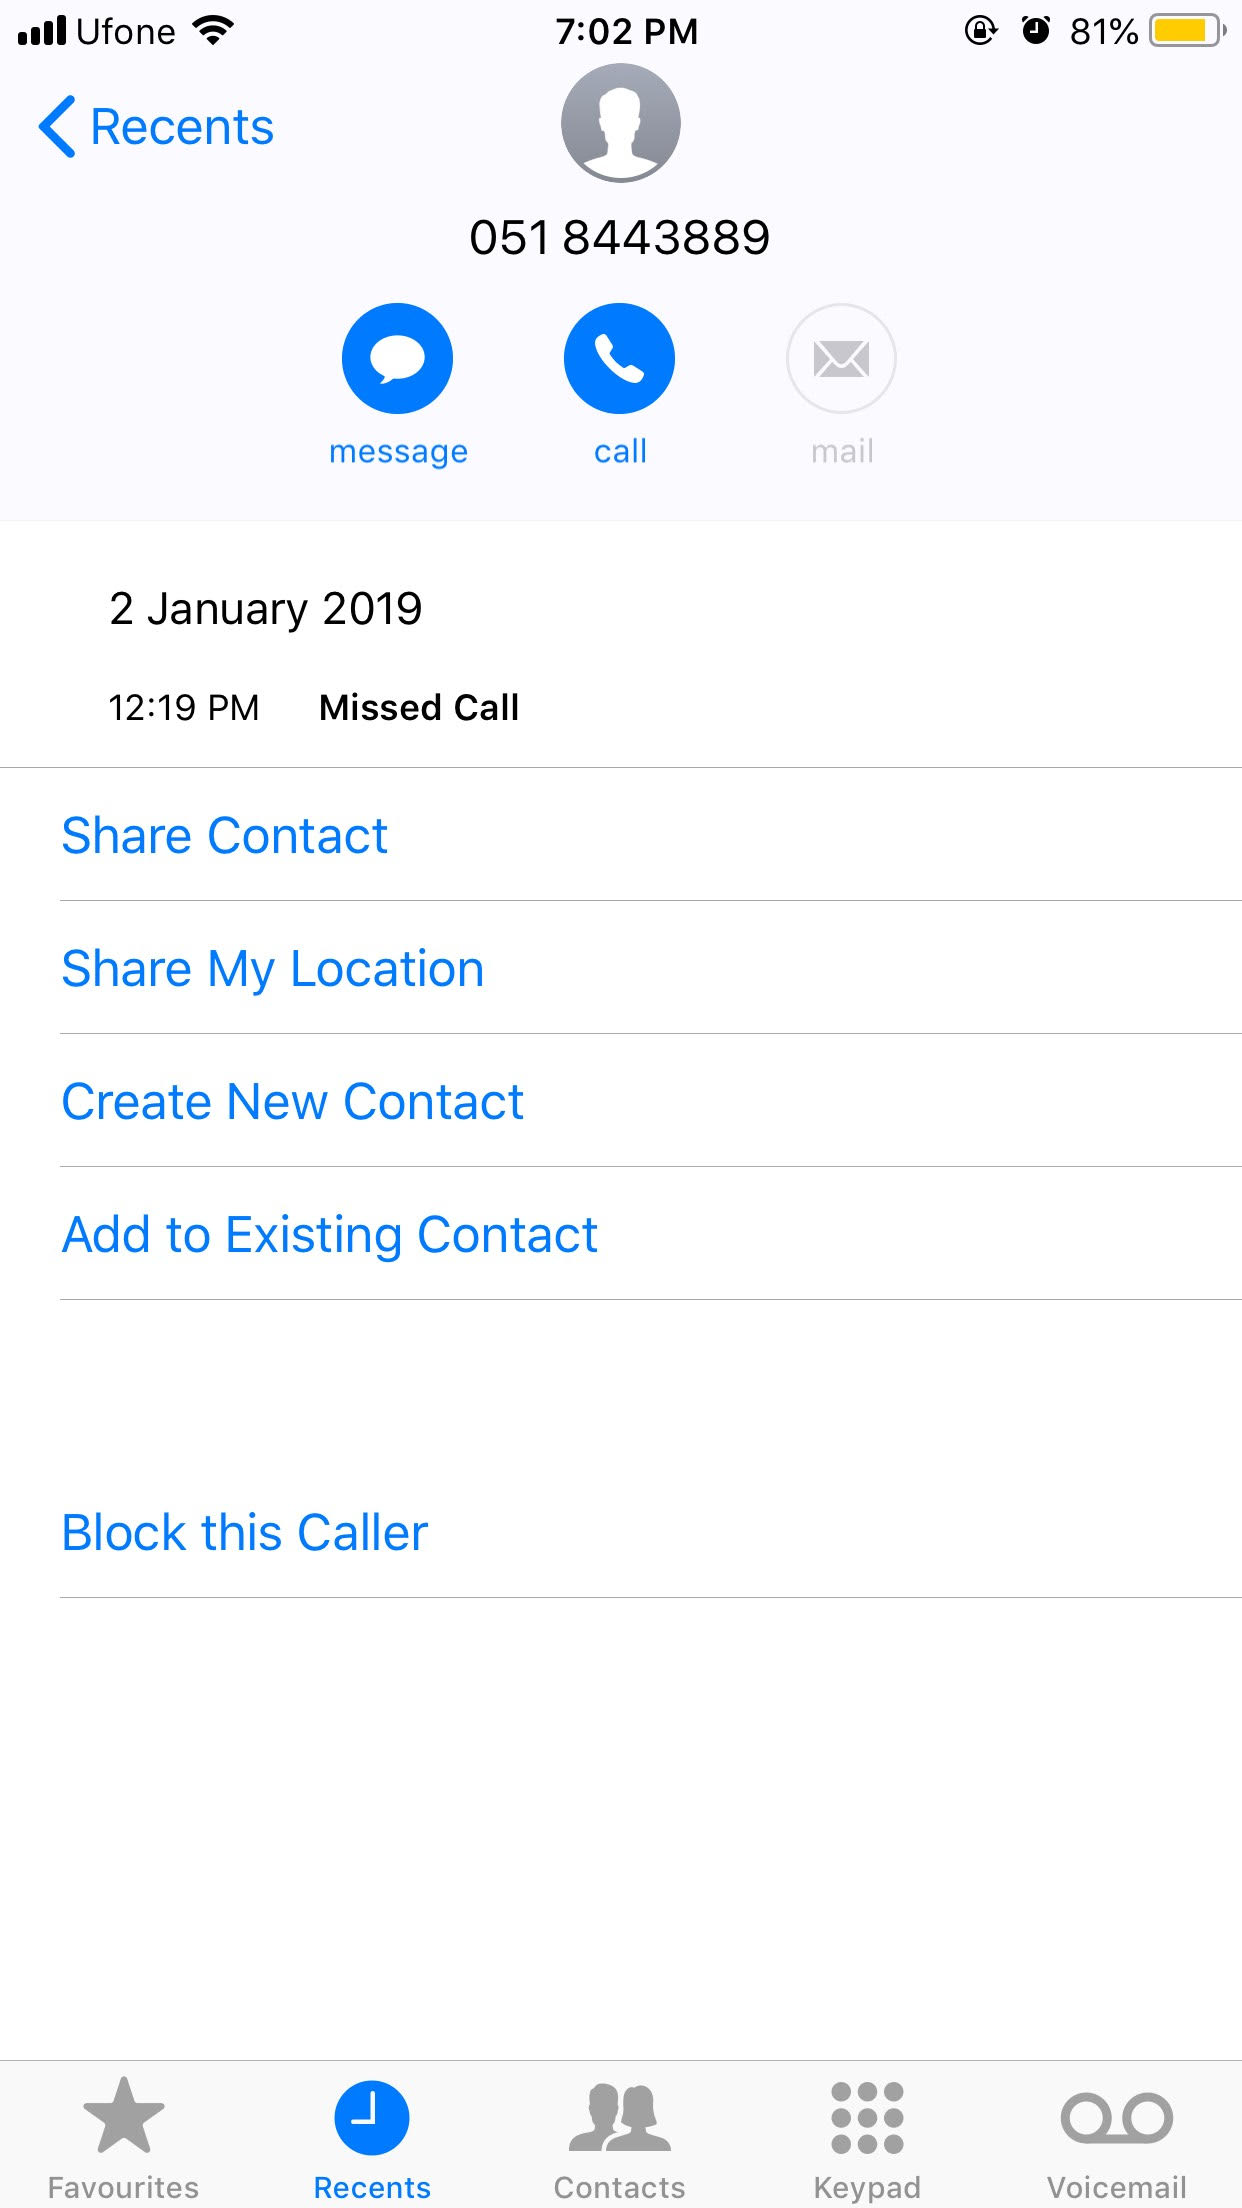 These Are 3 Different Ways To Block Spam Calls On iPhones